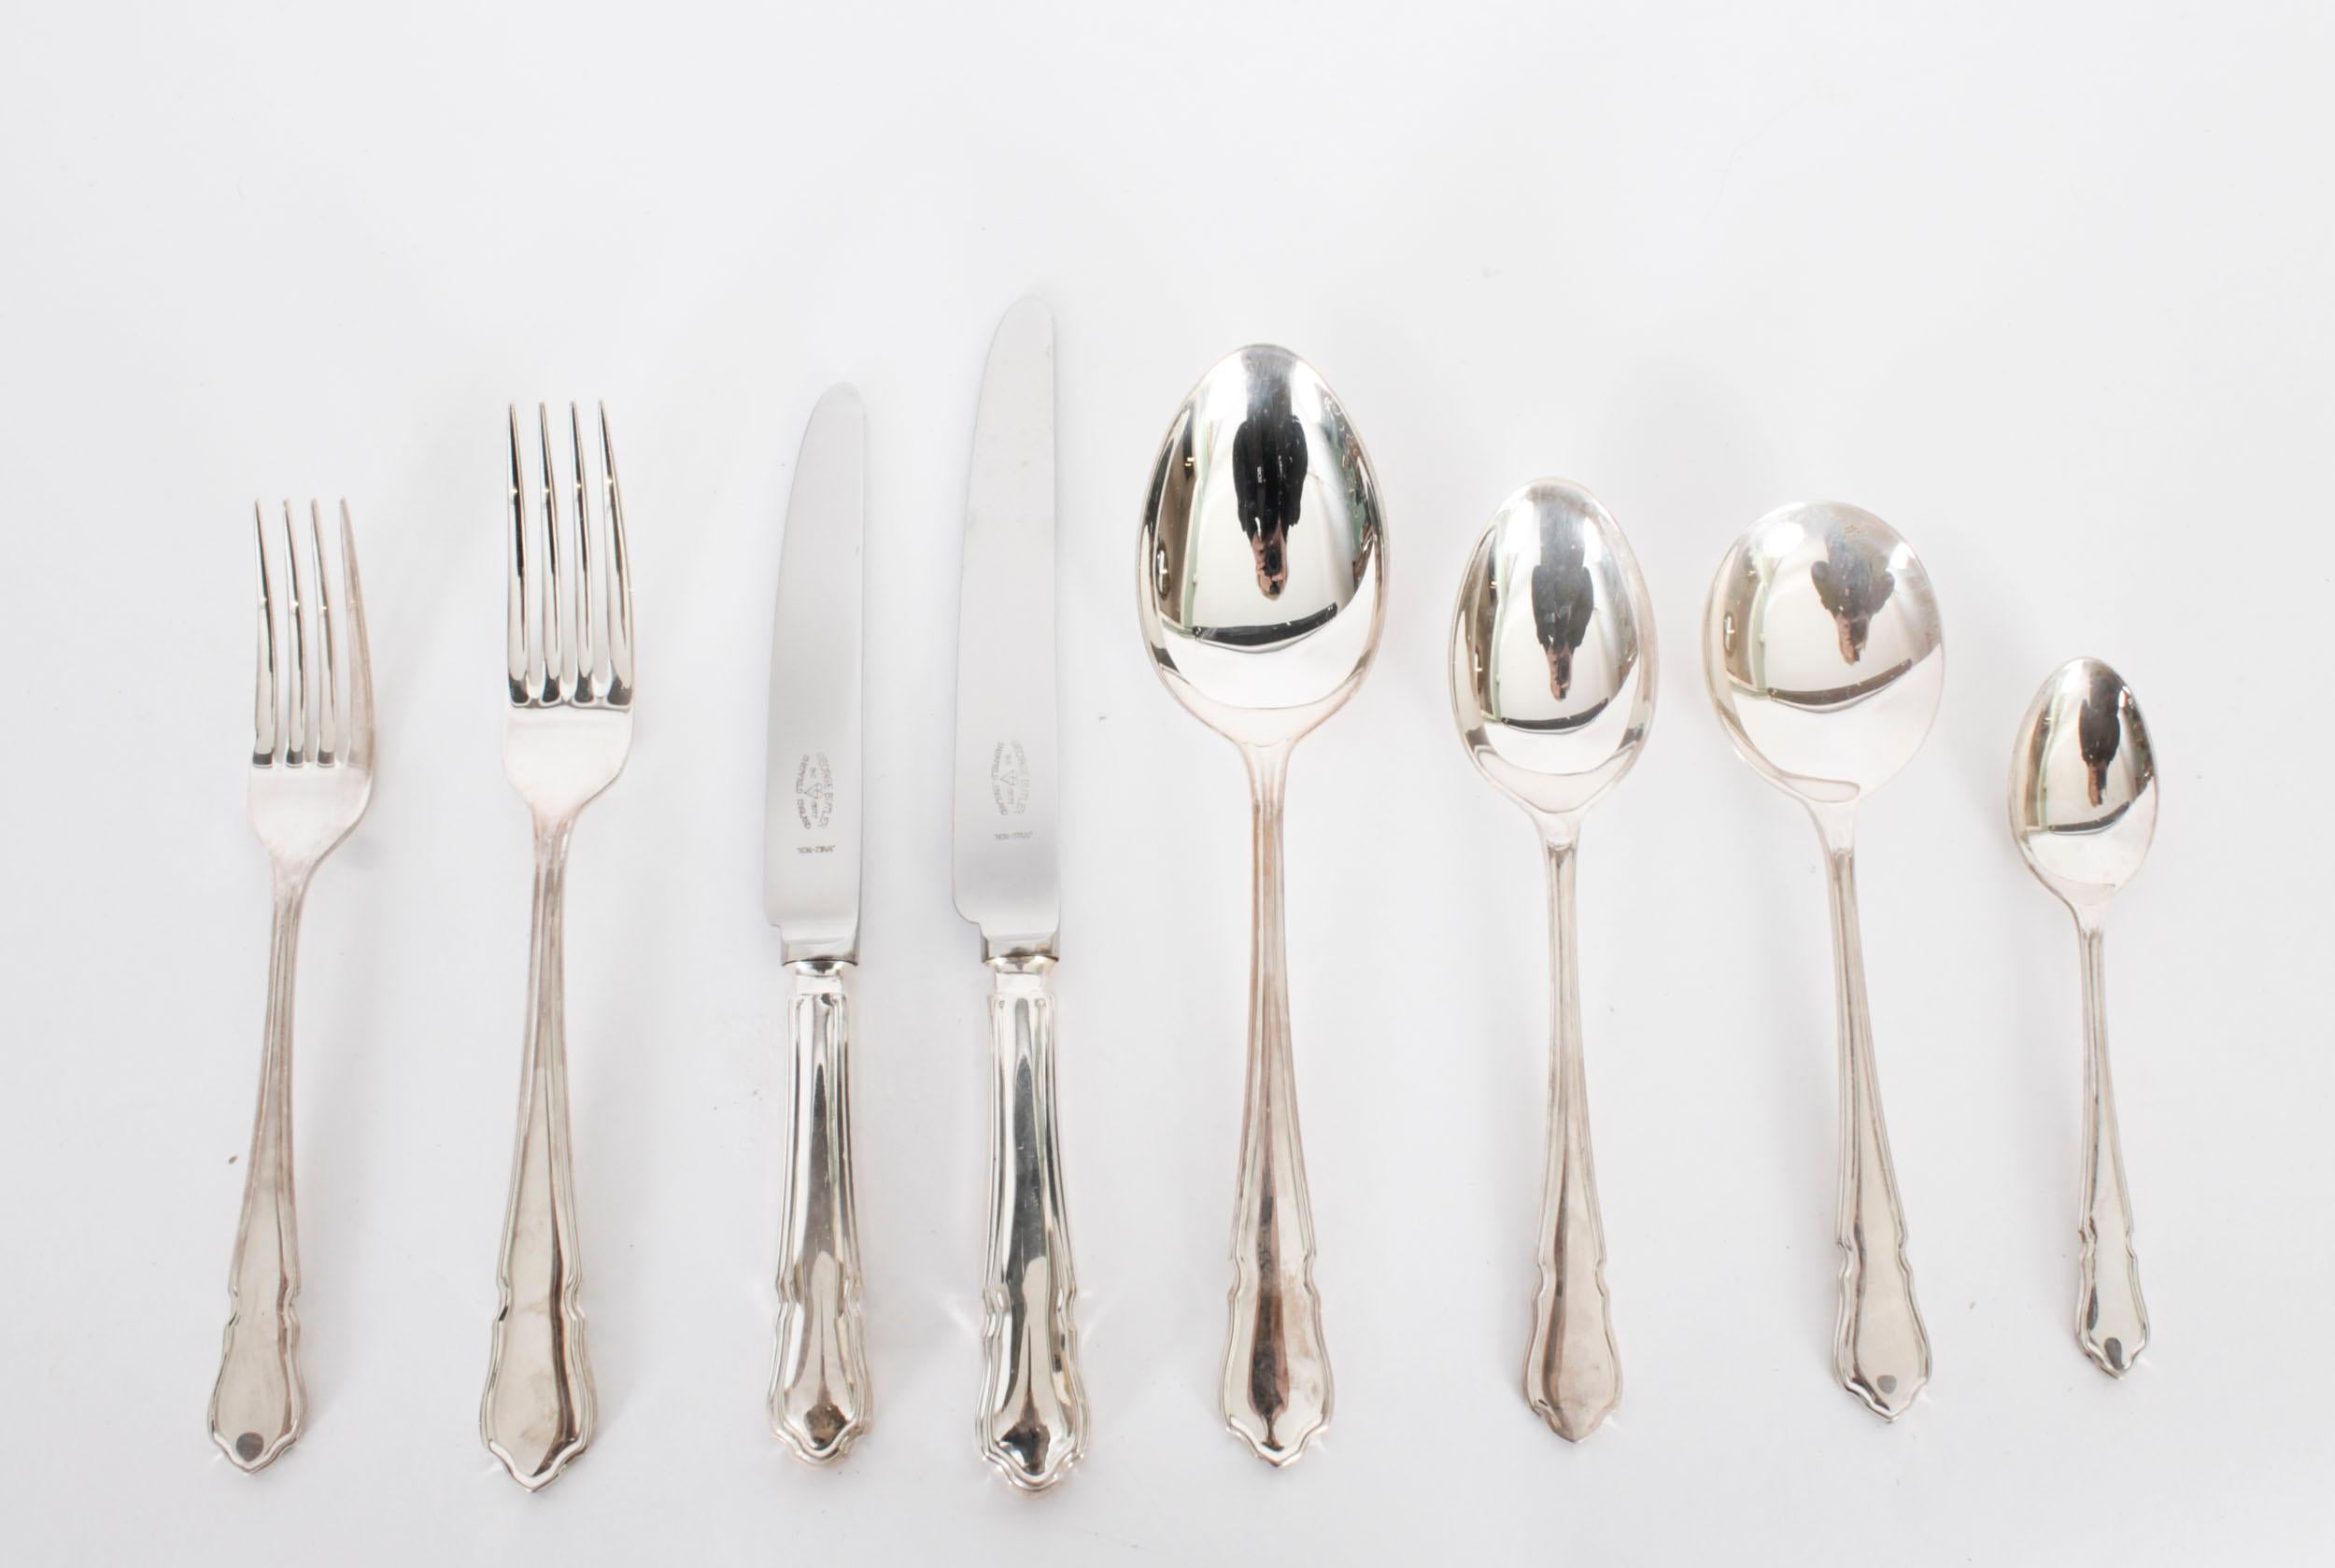 This is a stunning vintage 8 place setting silver plated cutlery set by the renowned Sheffield silversmith George Butler, mid 20th century in date.
 
The beautiful set consists of 60 pieces, in the elegant Dubarry pattern, that have never been